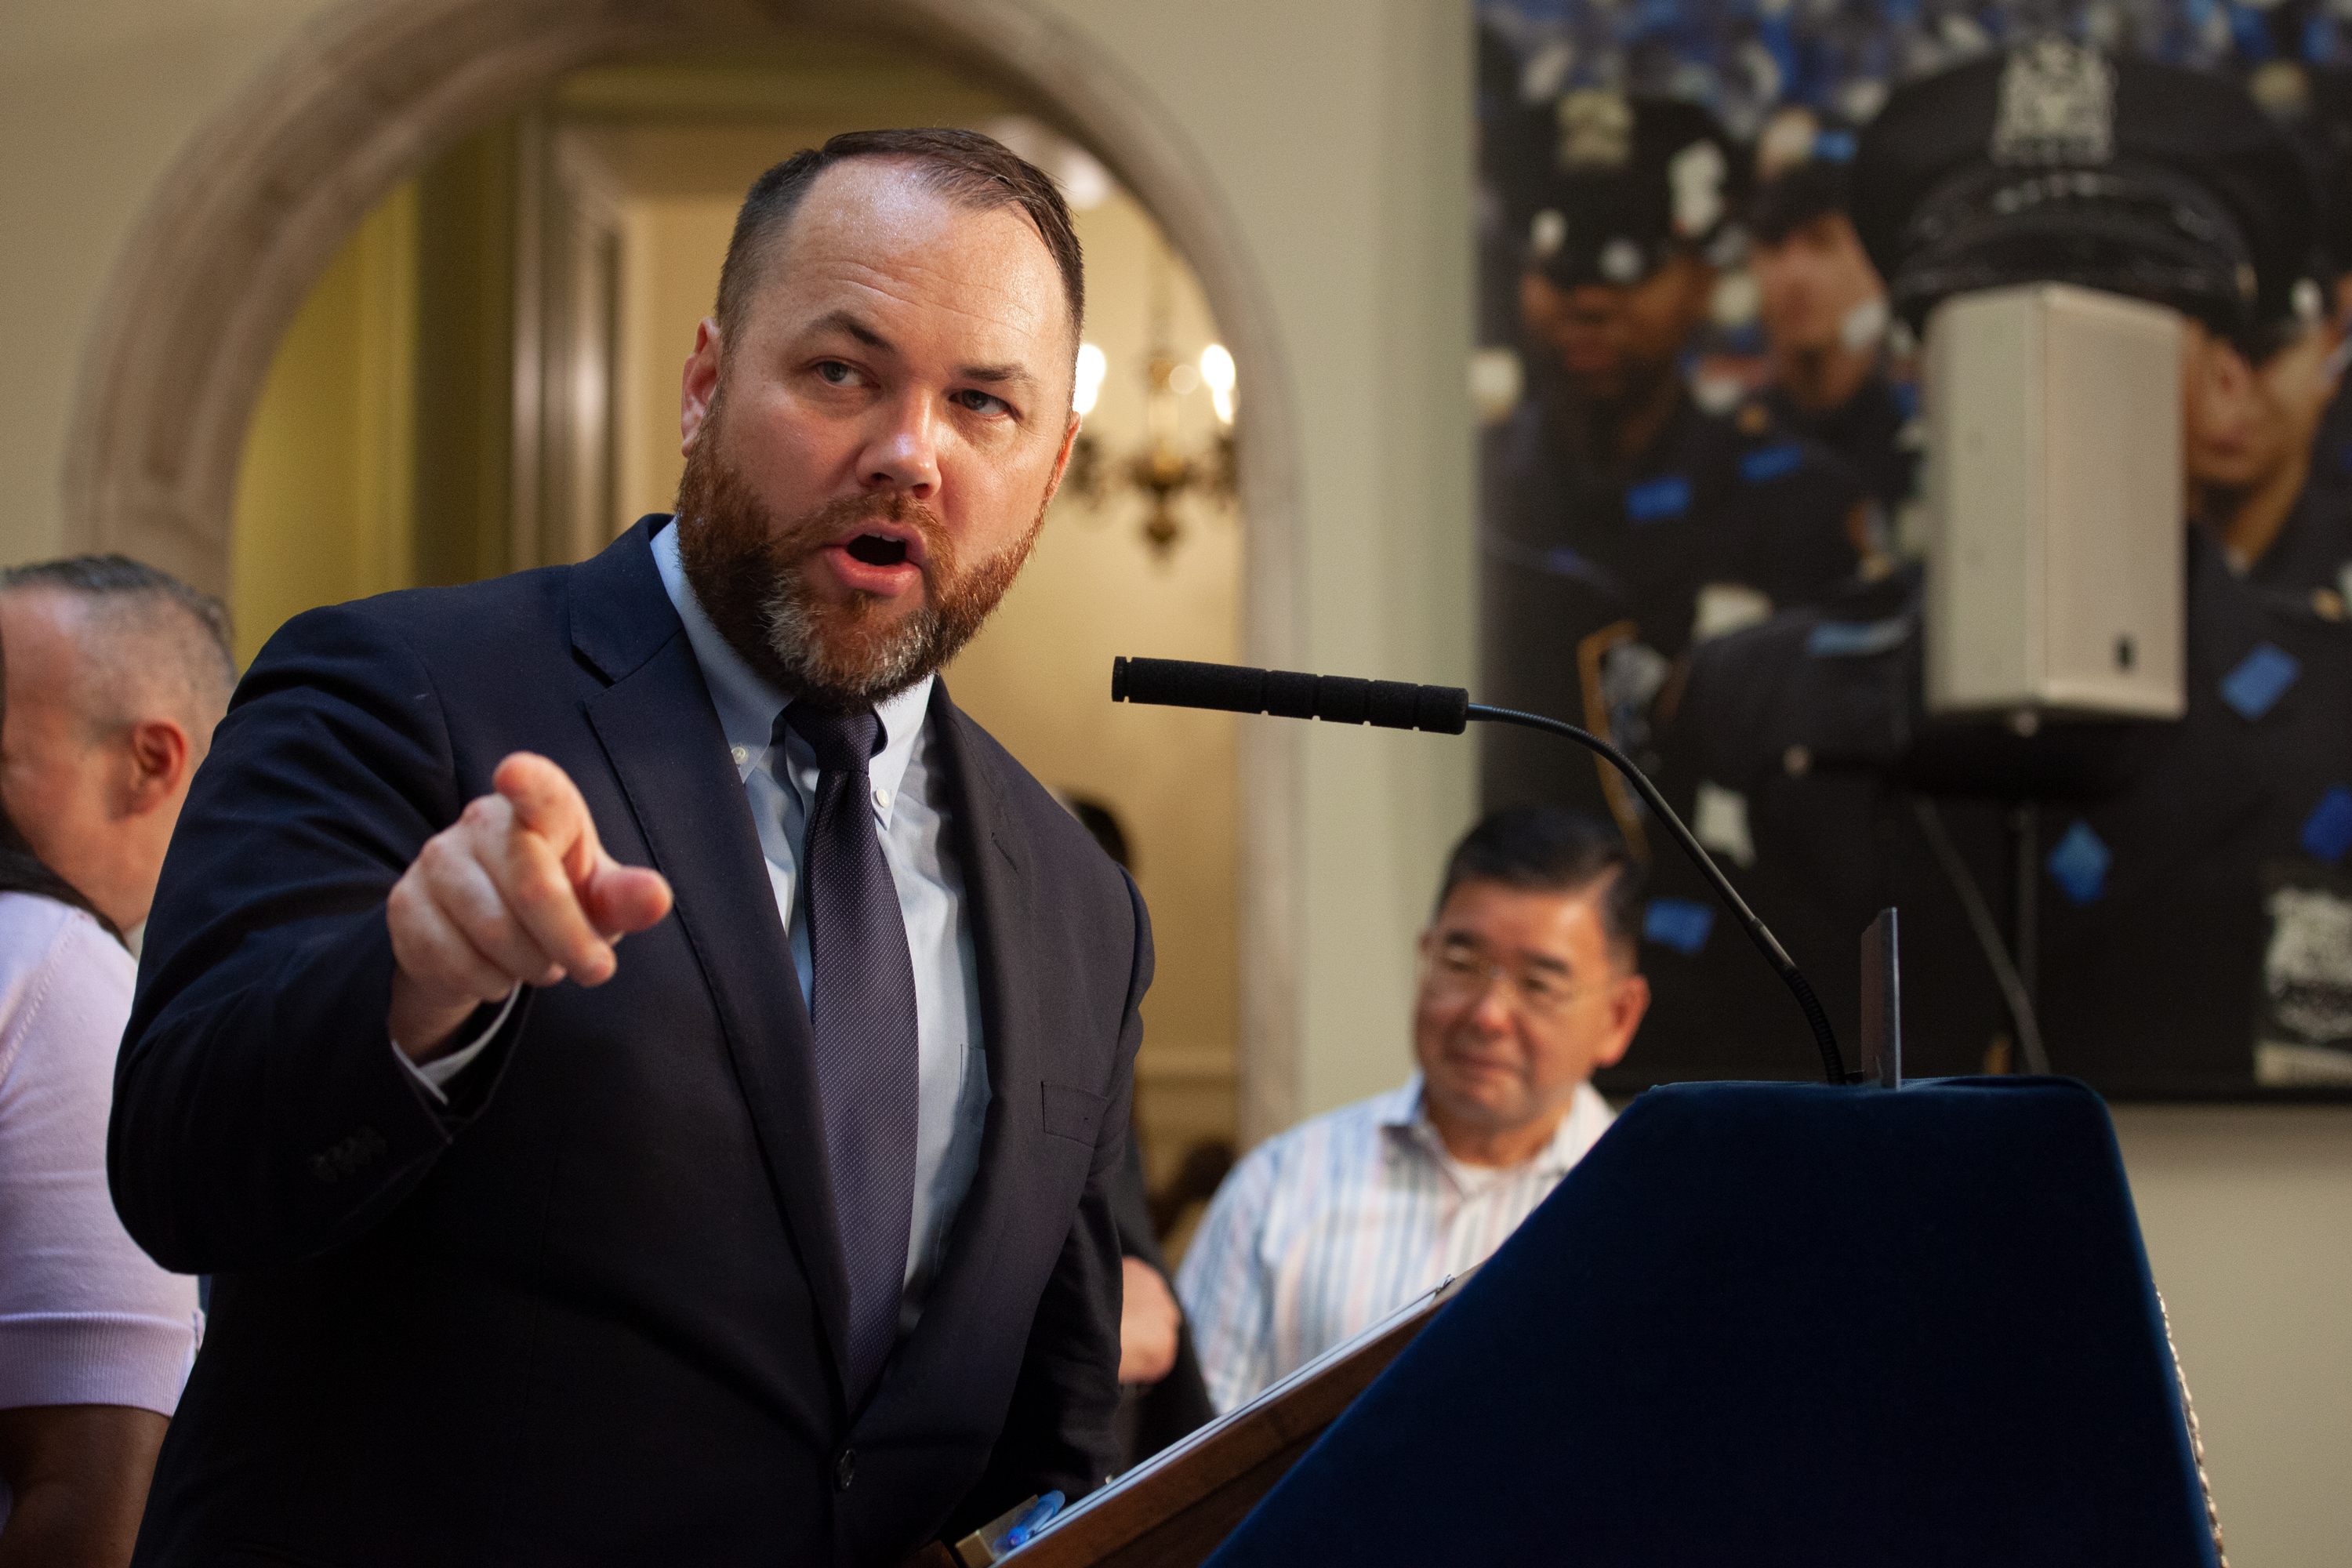 Council Speaker Corey Johnson answers media questions at City Hall about the 2022 budget, June 30, 2021.